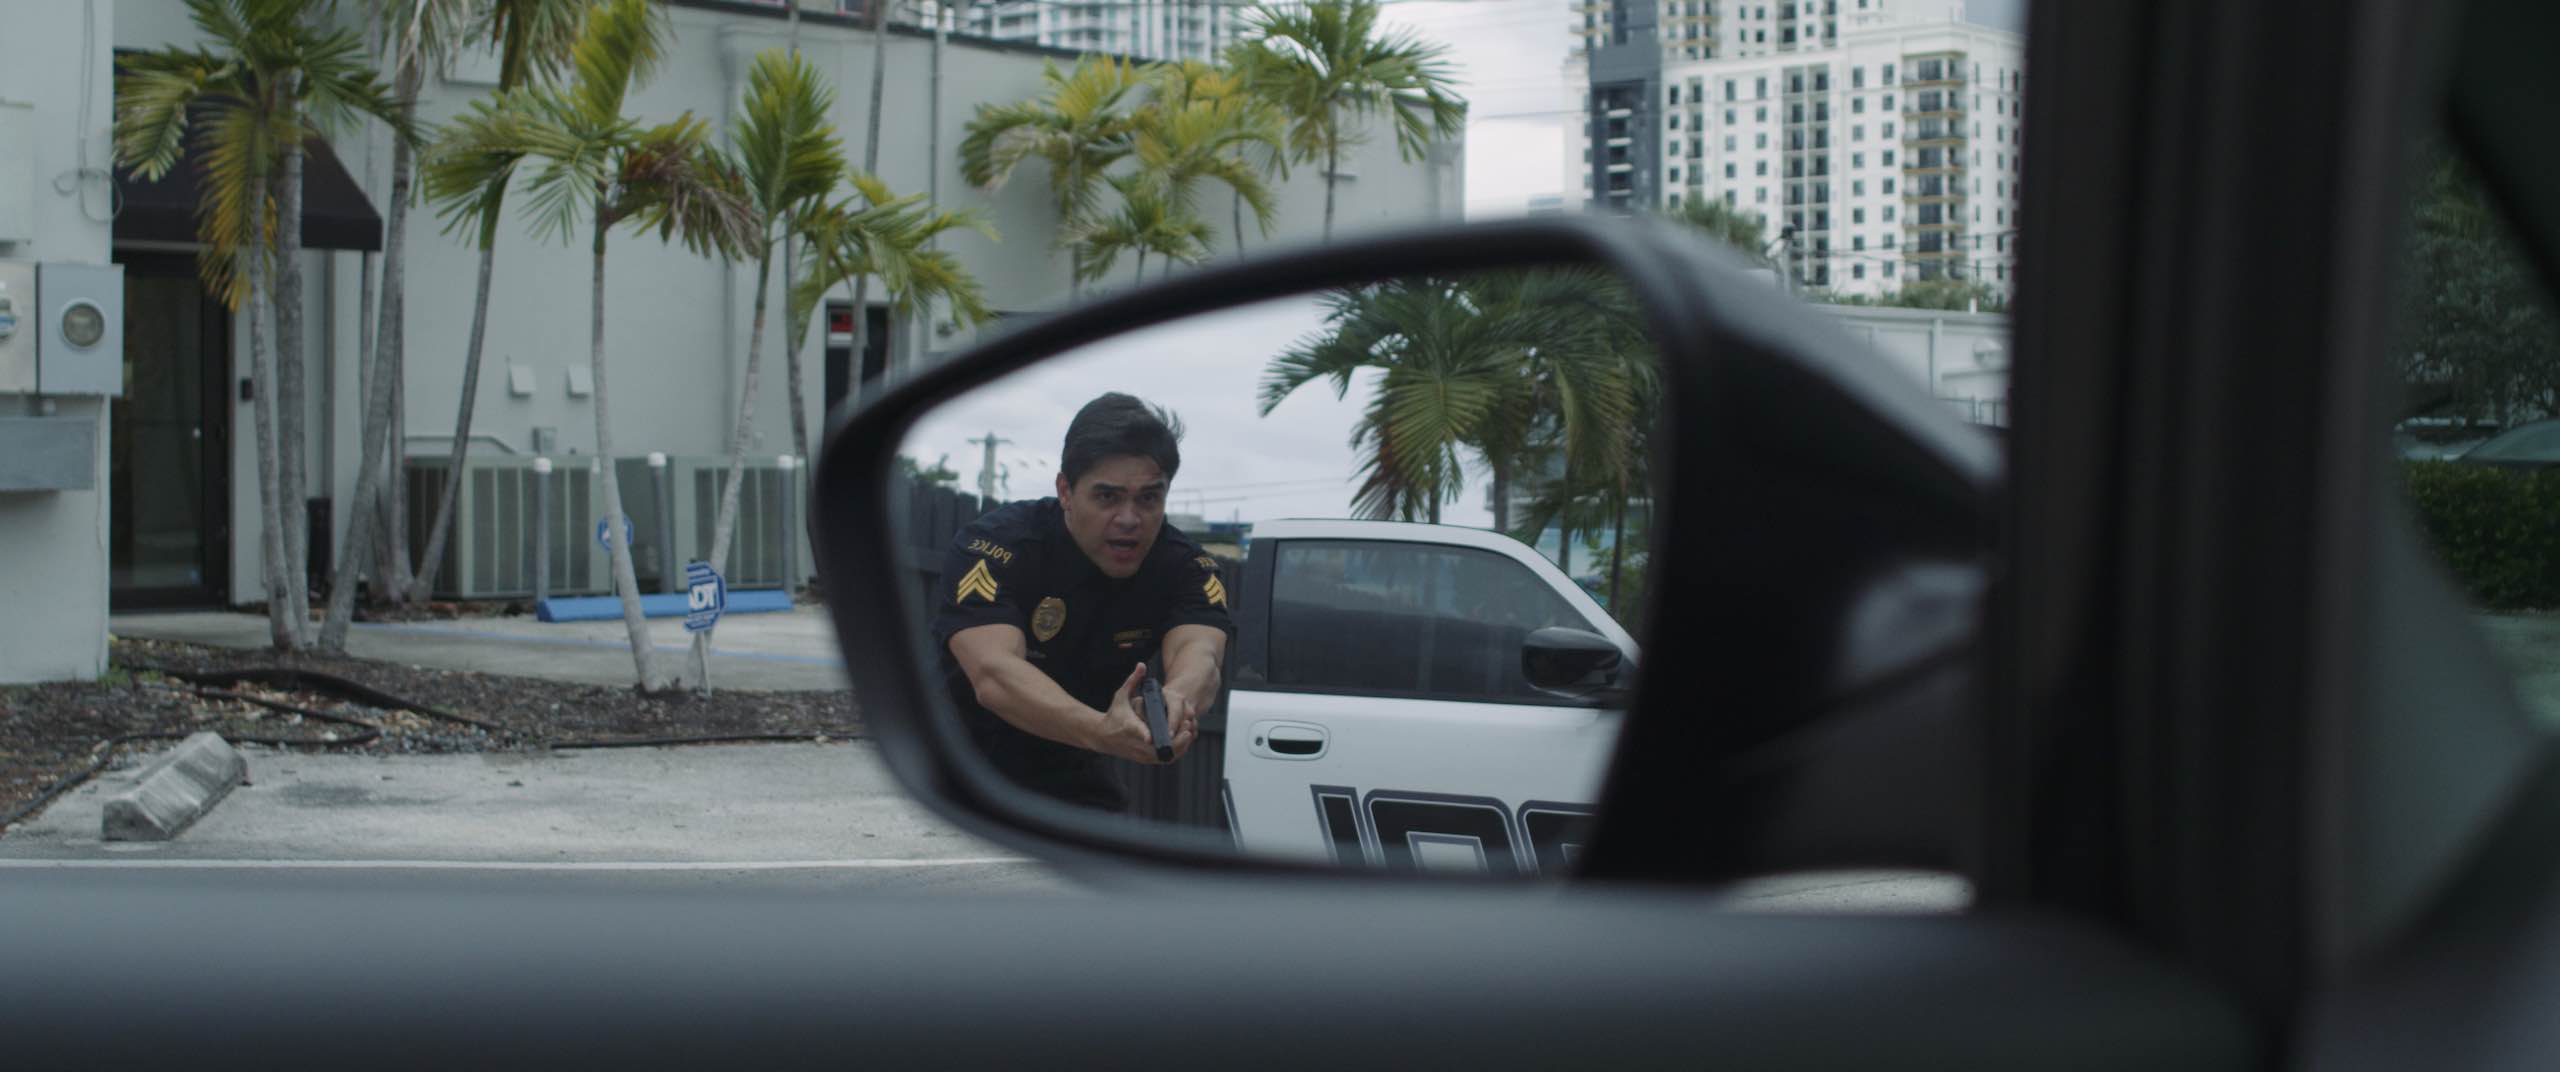 View of cop in a car side mirror with gun drawn